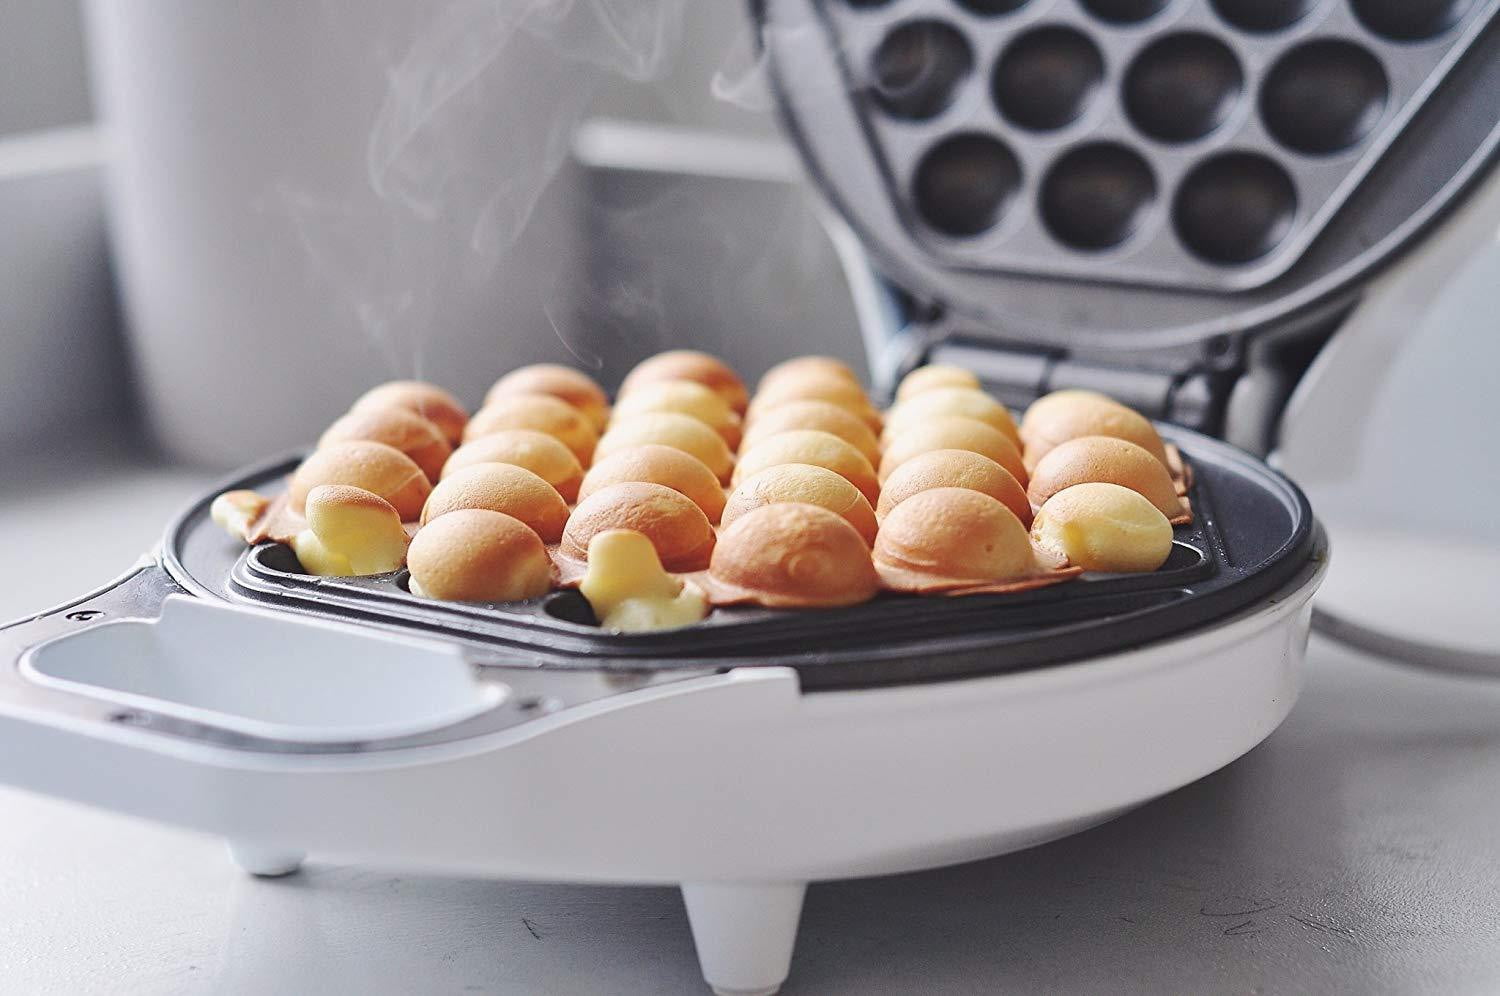 MasterChef Bubble Waffle Maker- Electric Non stick Hong Kong Egg Waffler  Iron Griddle w FREE Recipe Guide- Ready in under 5 Minutes